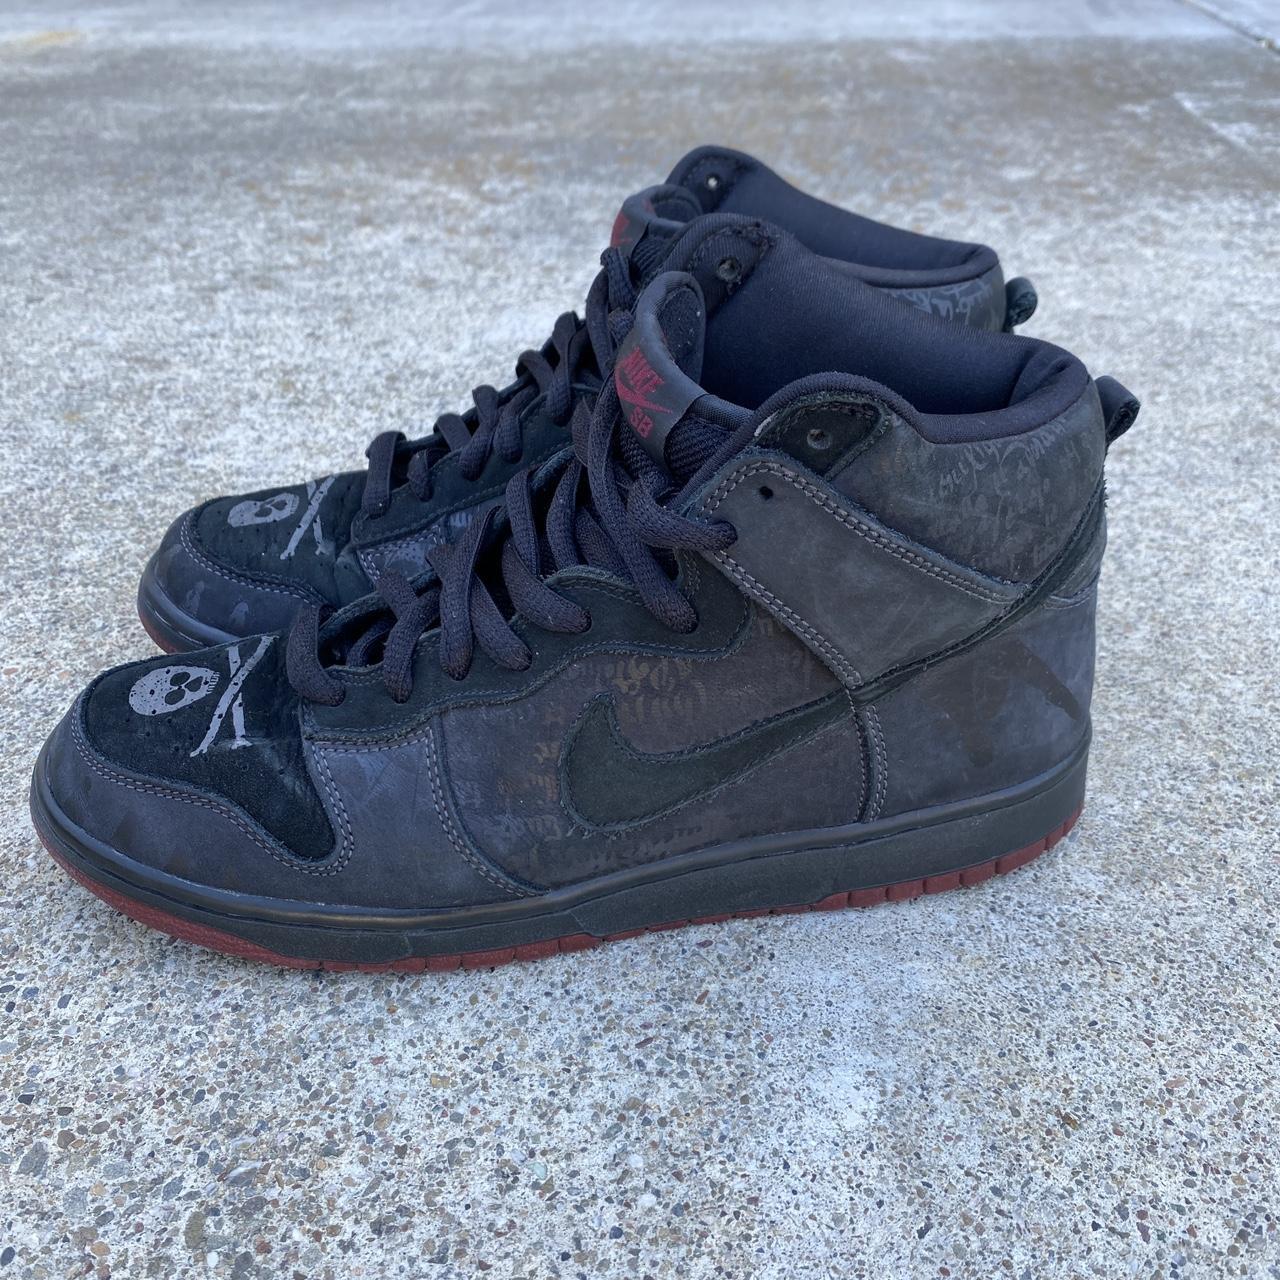 Nike Dunk High Pro SB Melvins, These are a treasure....